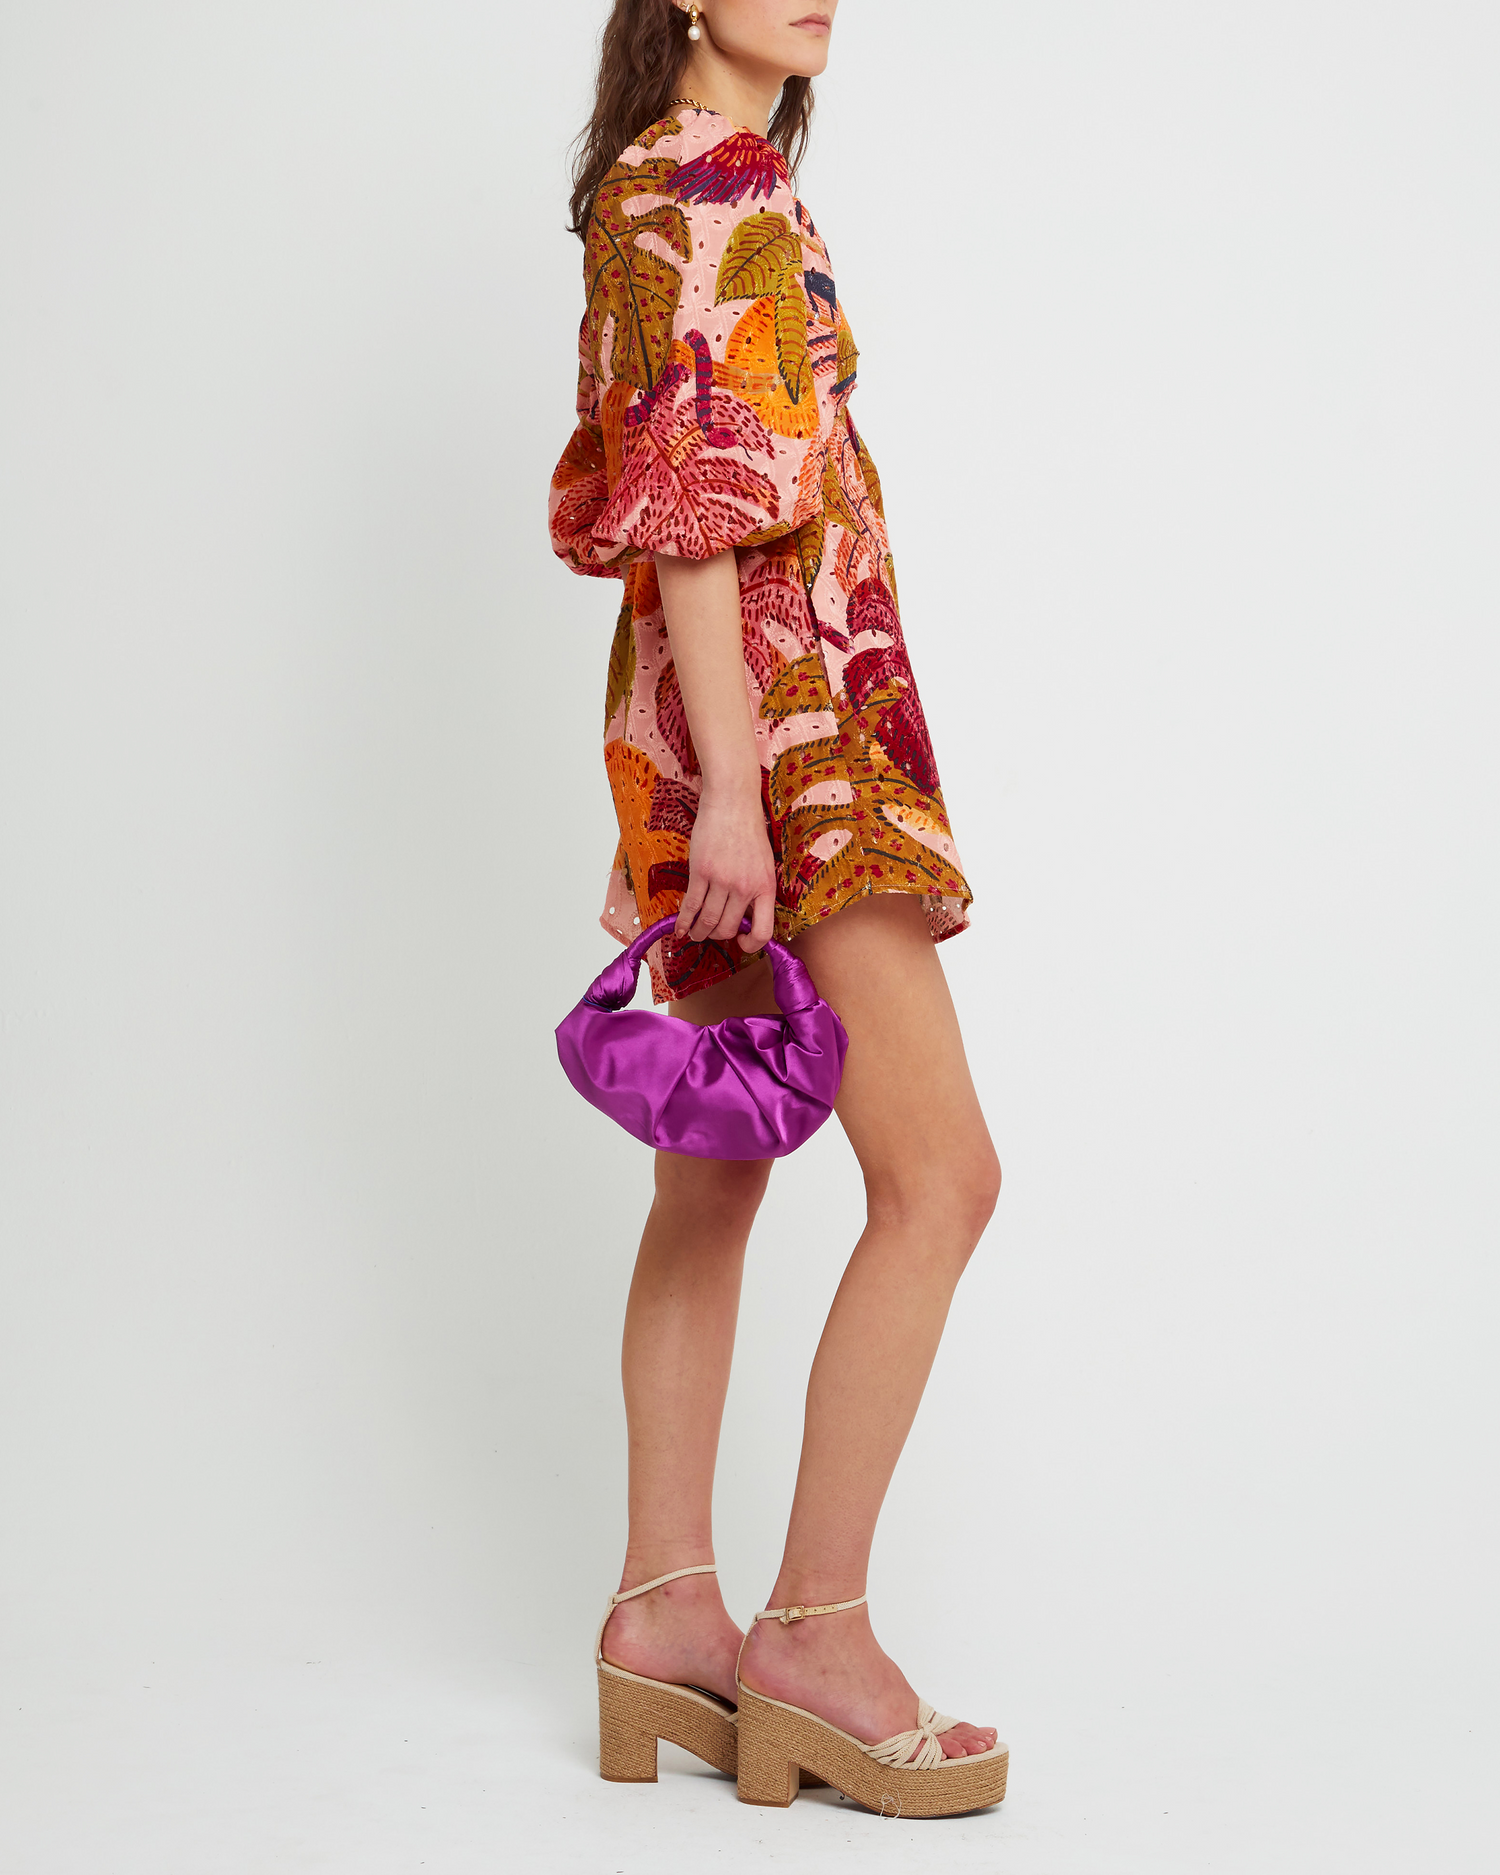 Third image of Robbie Dress, a  mini dress, tropical, floral, print, pink, puff sleeves, lace, eyelet